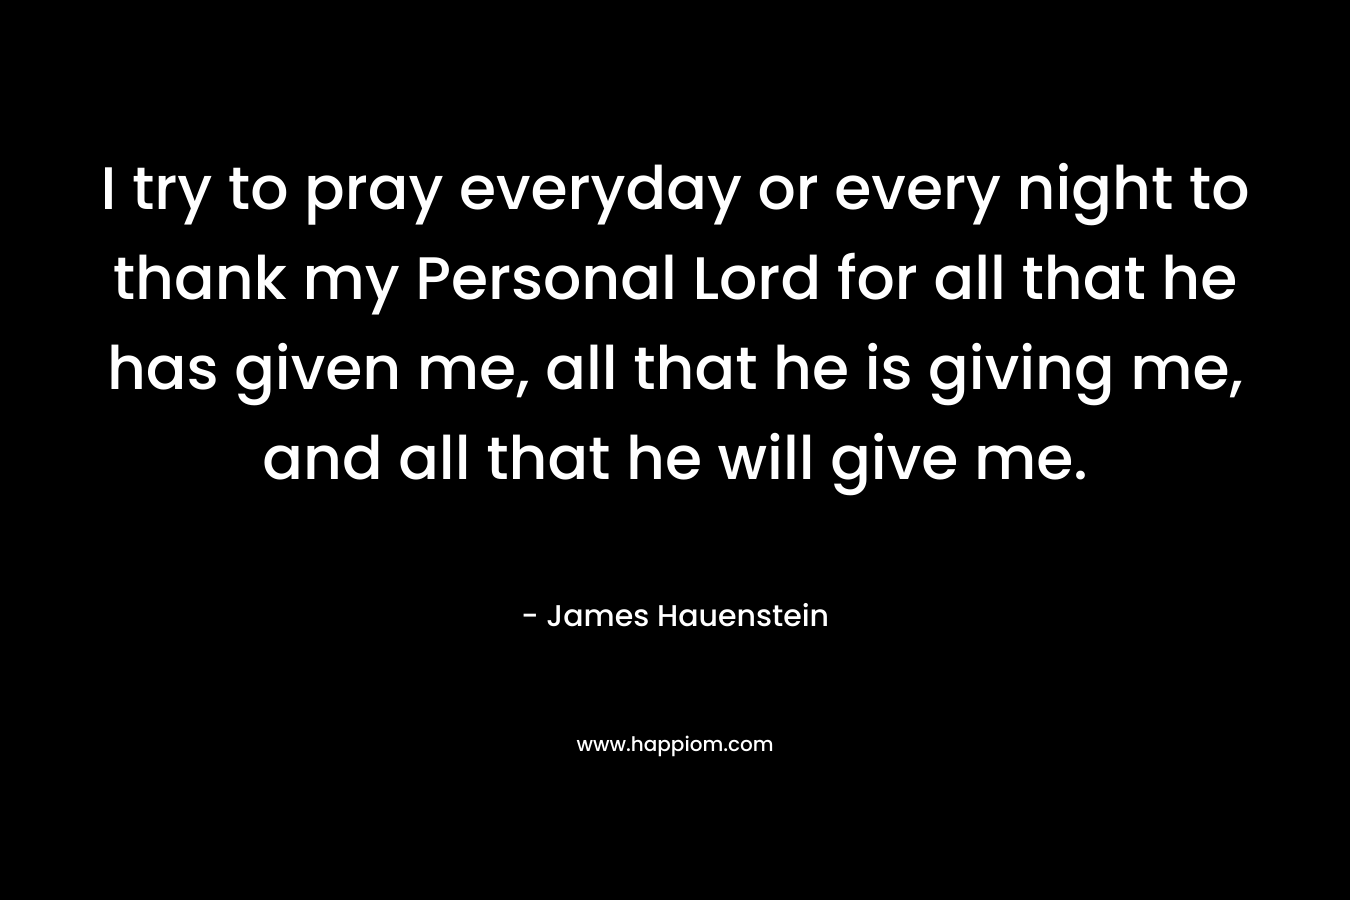 I try to pray everyday or every night to thank my Personal Lord for all that he has given me, all that he is giving me, and all that he will give me.